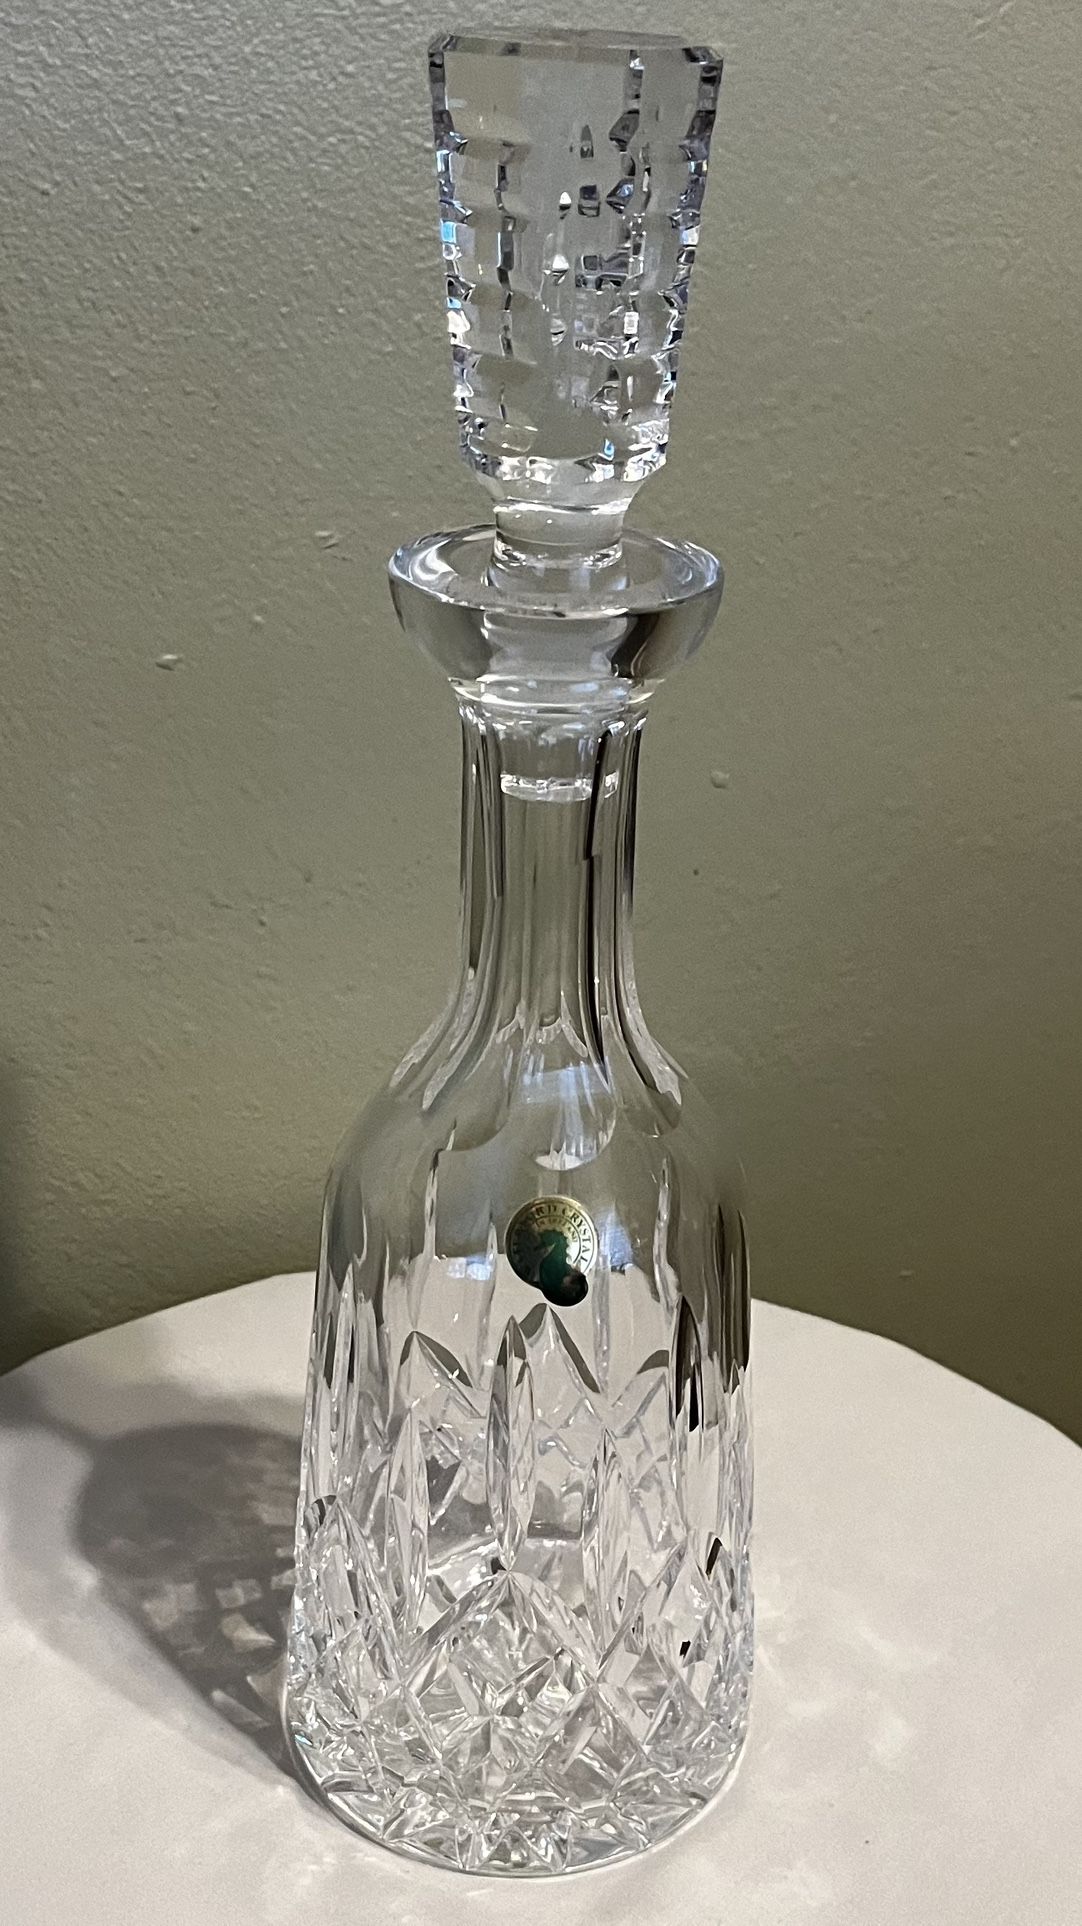 WATERFORD CRYSTAL DECANTER WITH CUT STOPPER APROX.  13 - 1/2” TALL